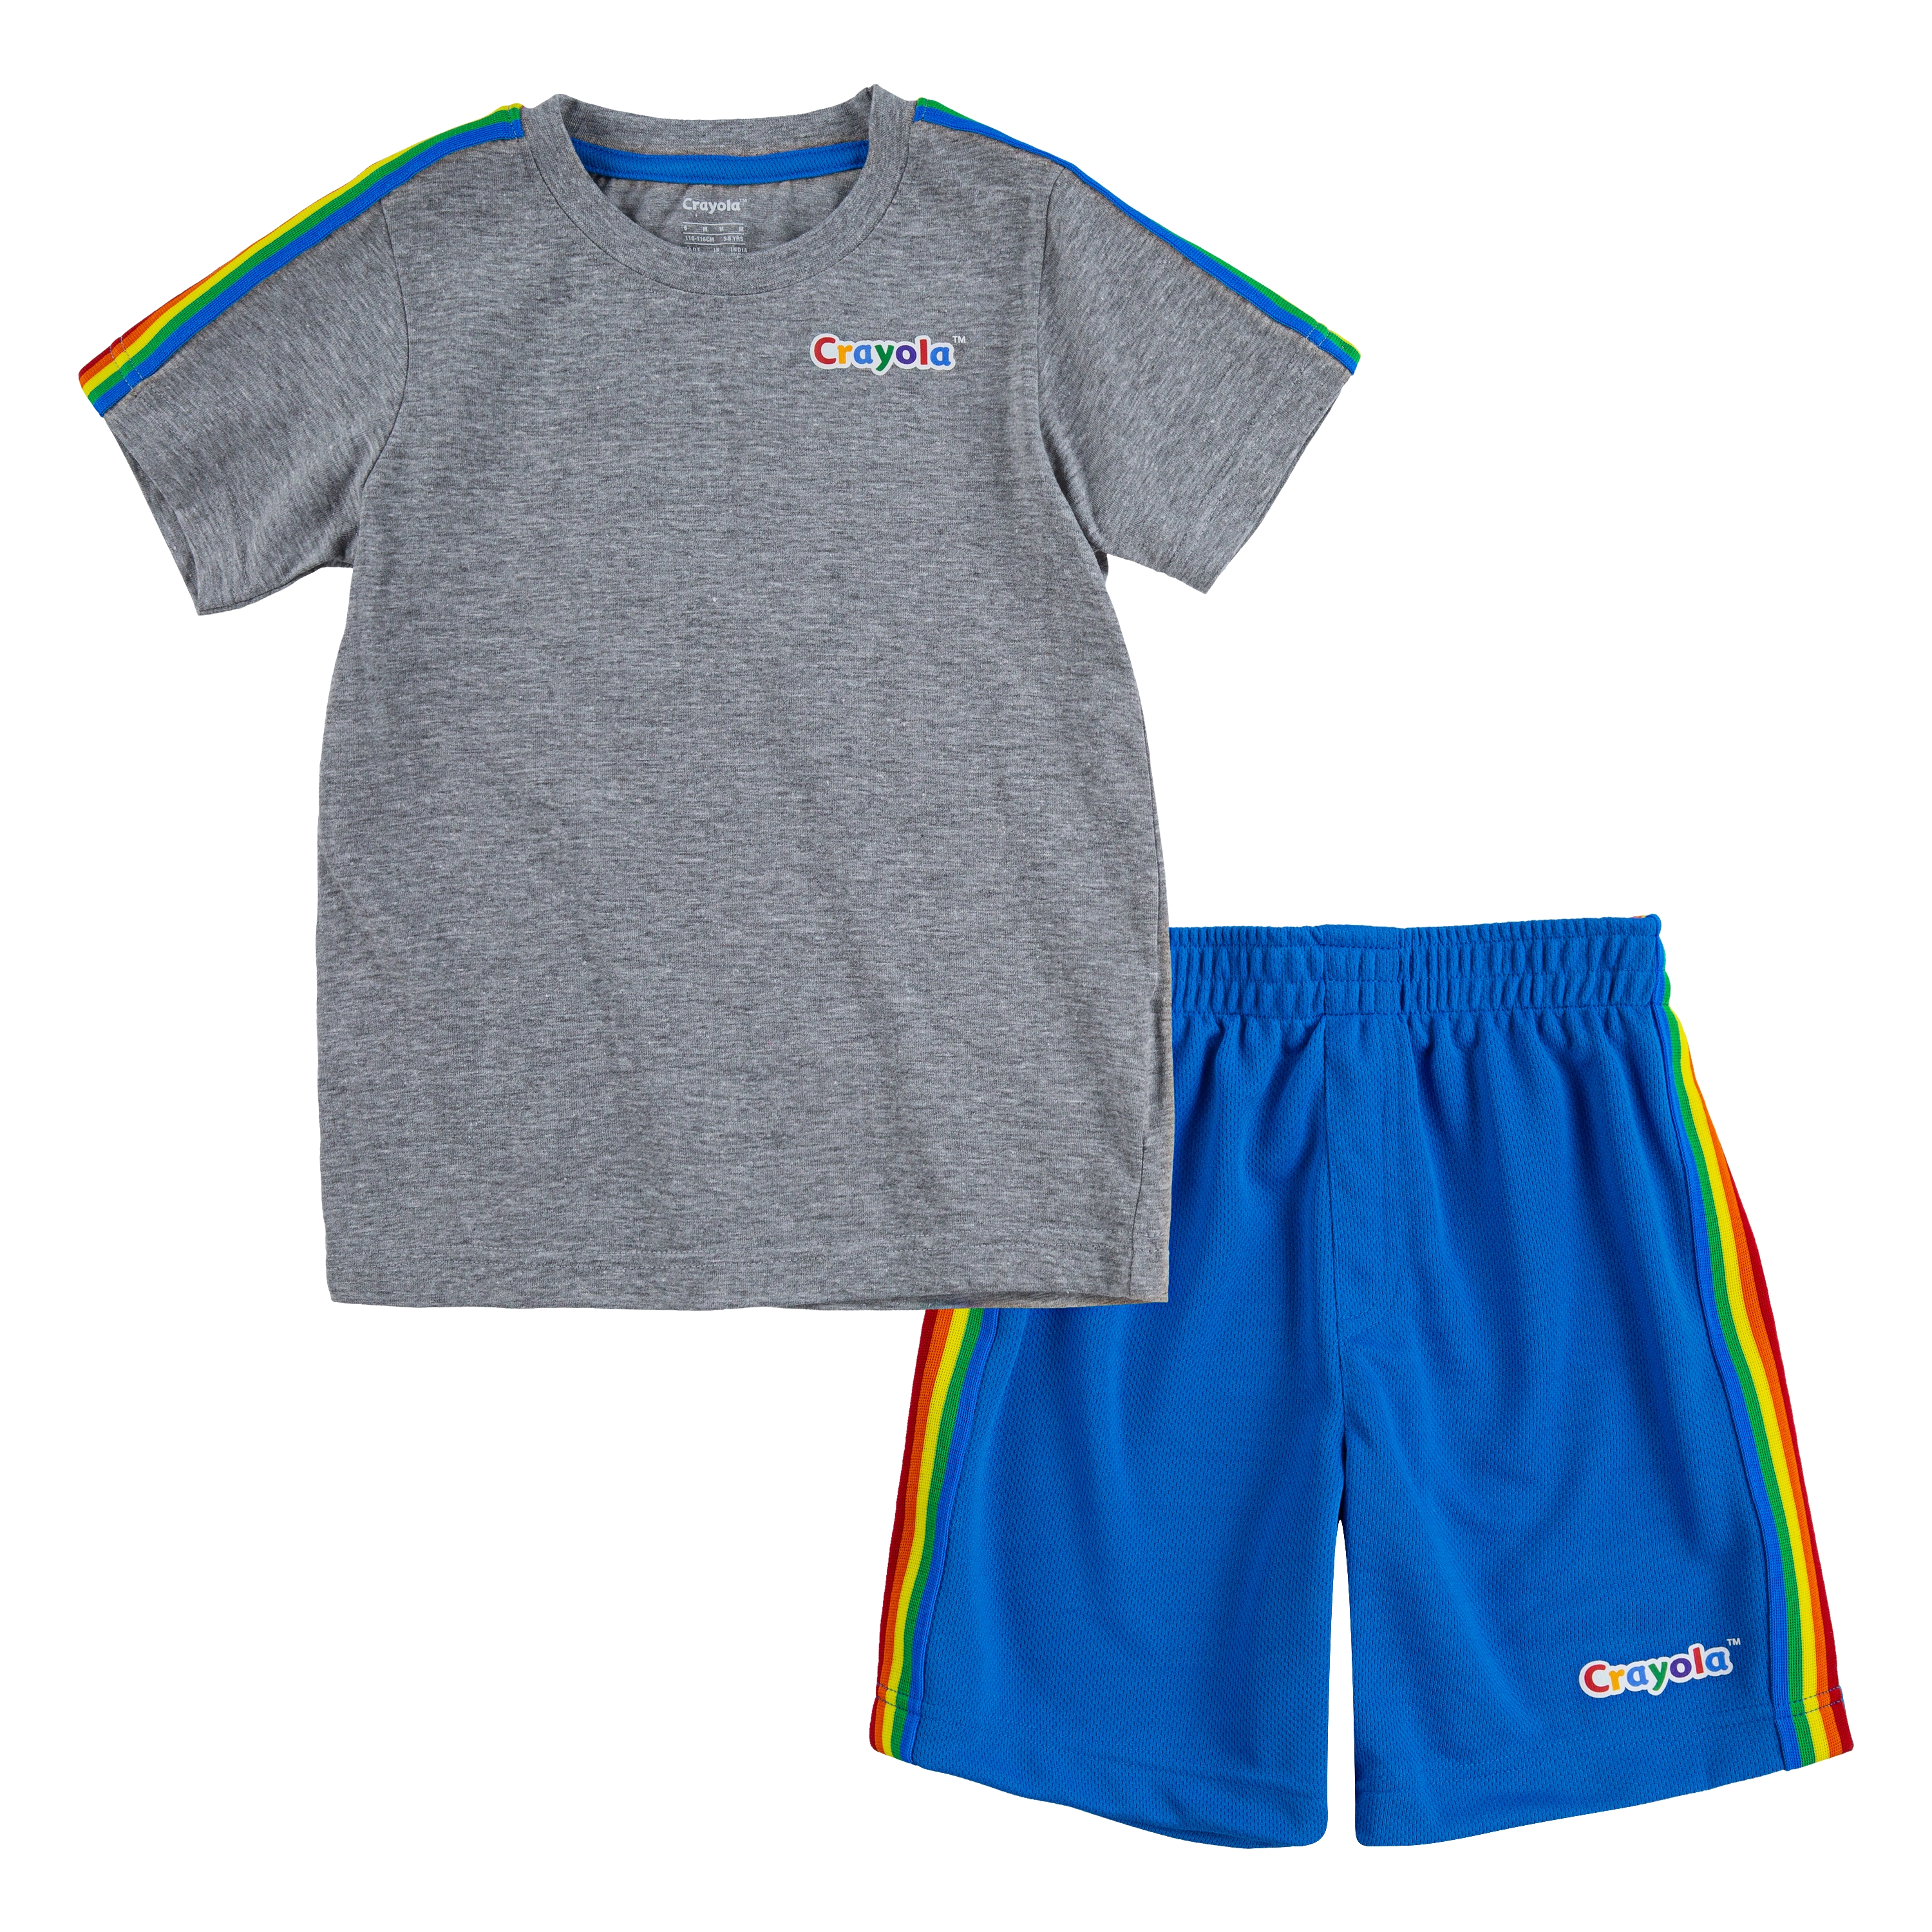 Crayola Childrens Apparel Boys Short Sleeve Graphic T-Shirt and Joggers 2-Piece Outfit Set